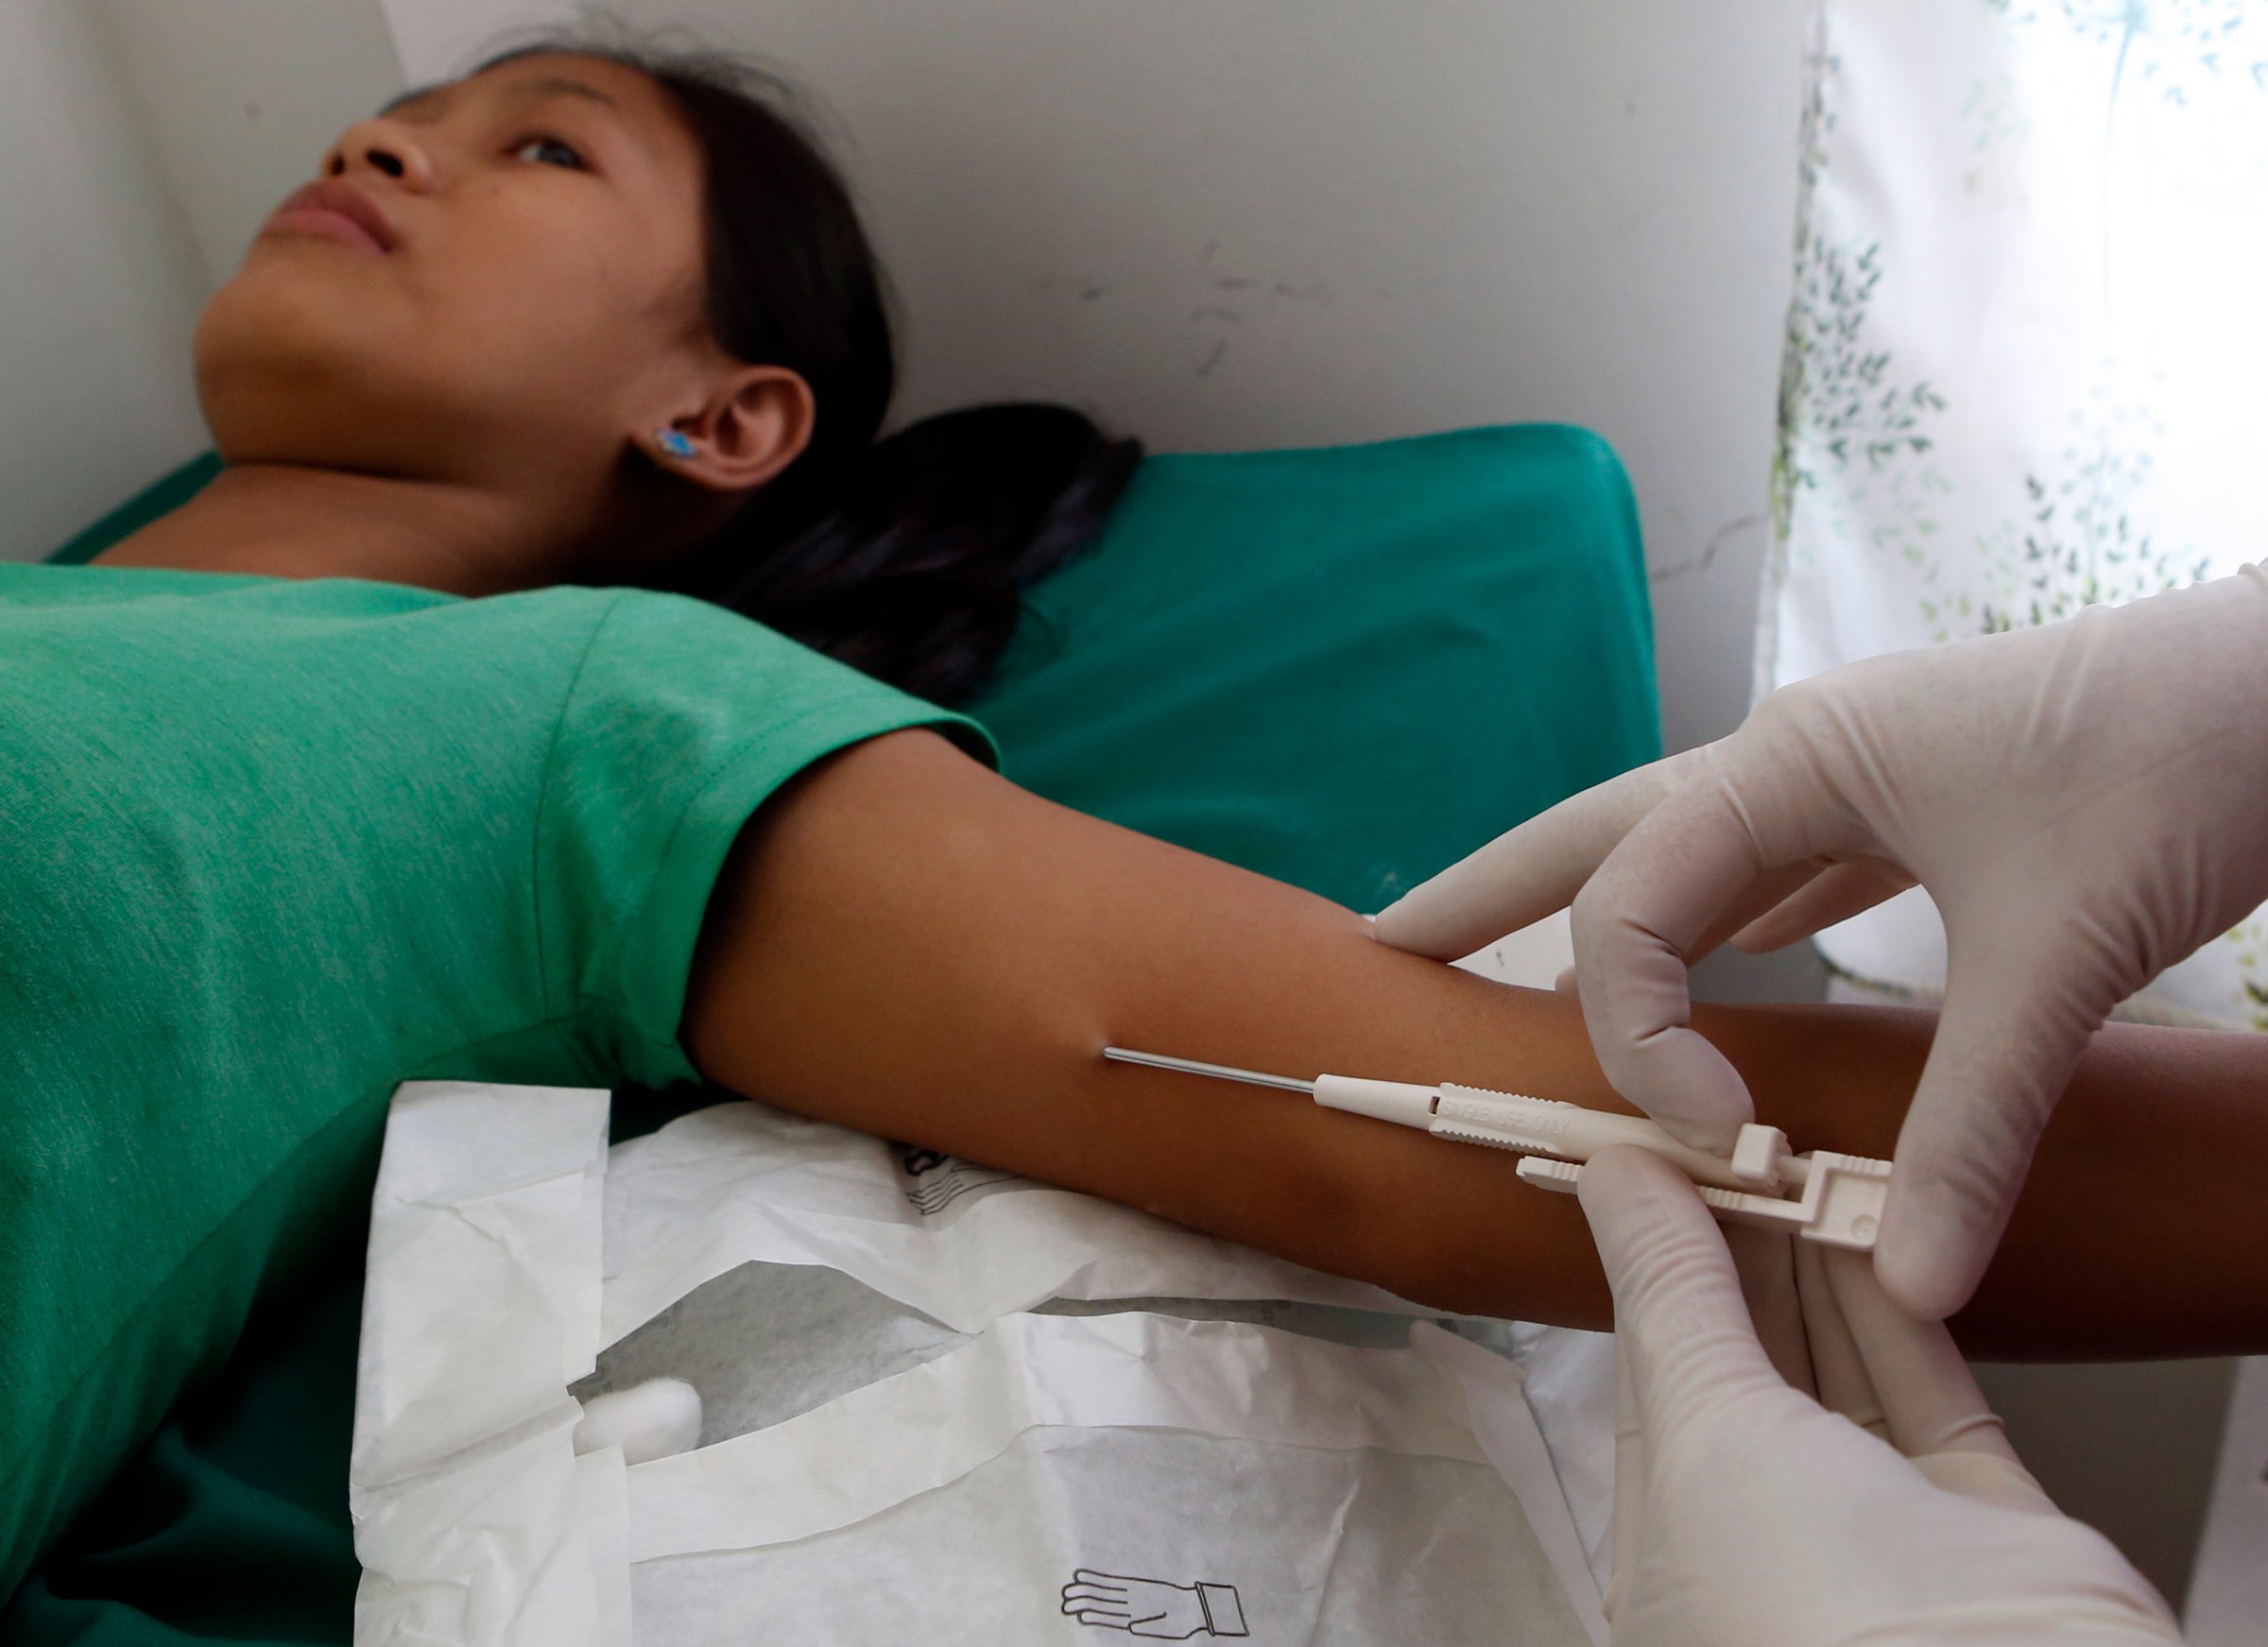 A 16-year-old mother receives a free contraceptive implant during a reproductive health medical mission organized by the United Nations Population Fund (UNFPA) in Tondo, Manila